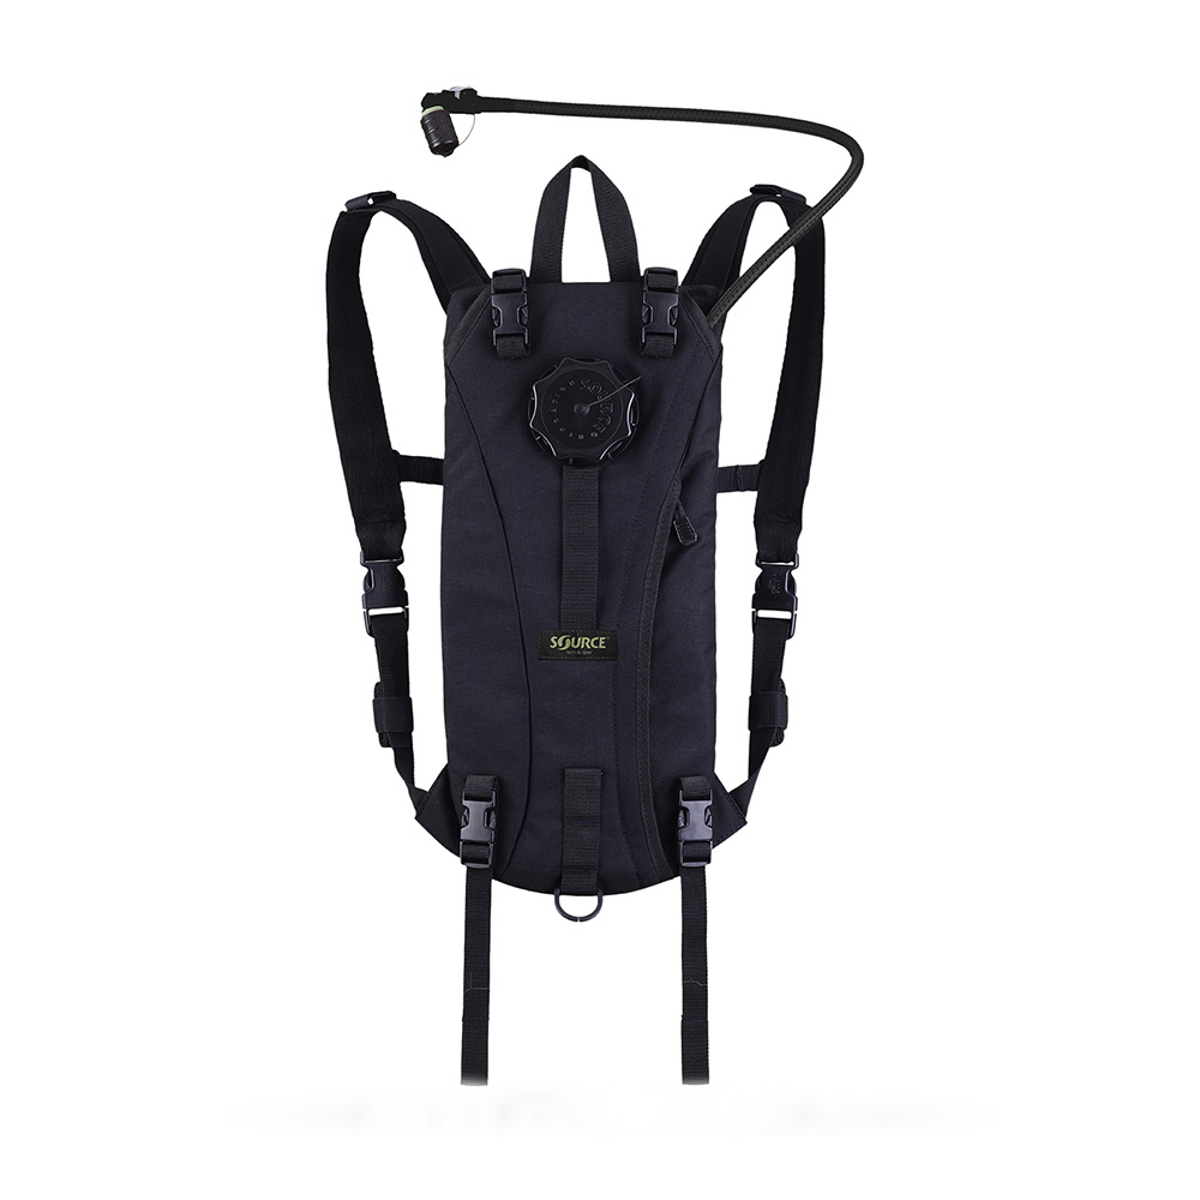 Source Tactical 2 liter hydration pack